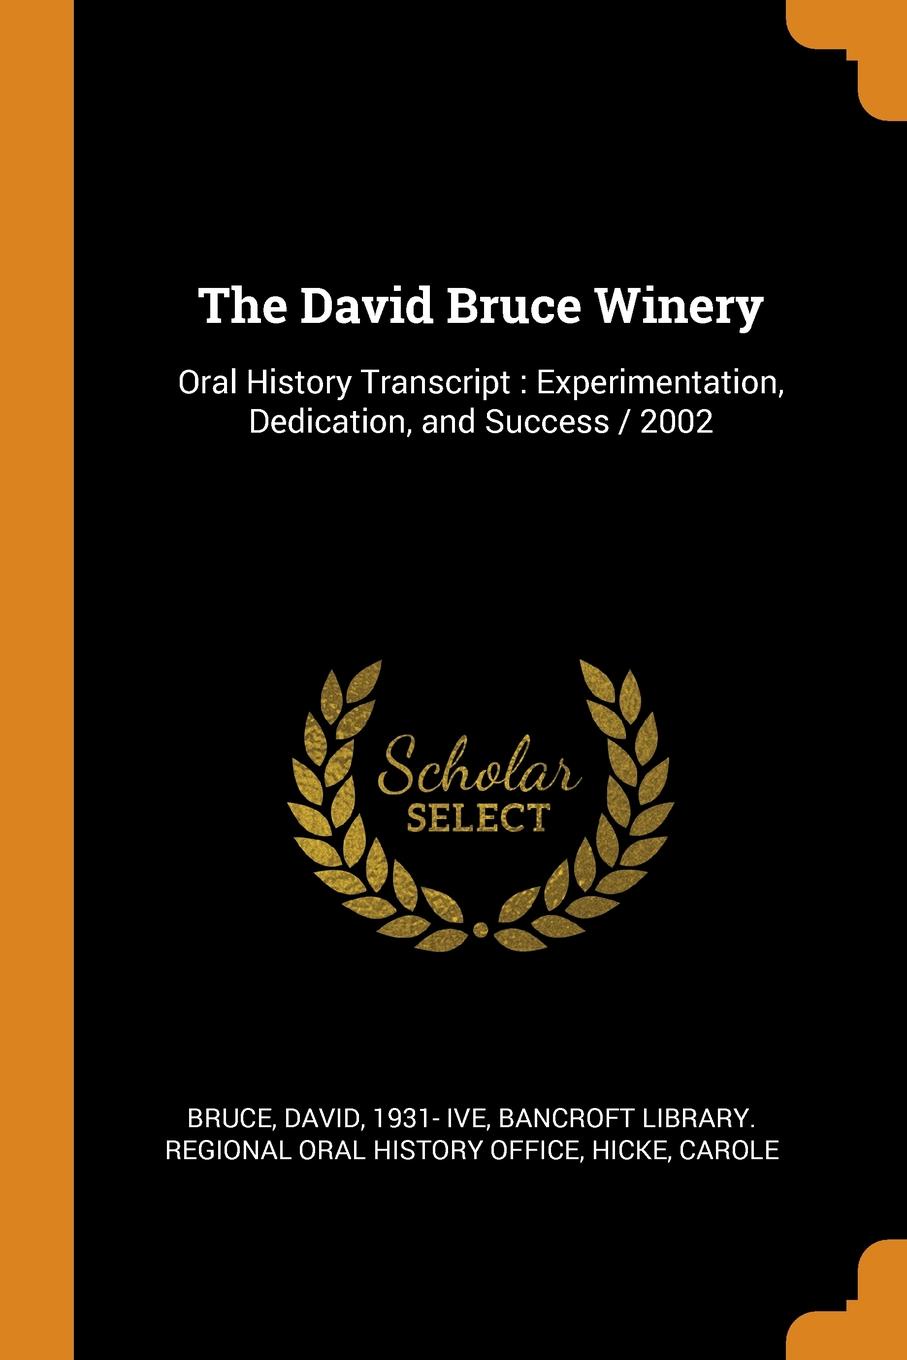 The David Bruce Winery. Oral History Transcript : Experimentation, Dedication, and Success / 2002